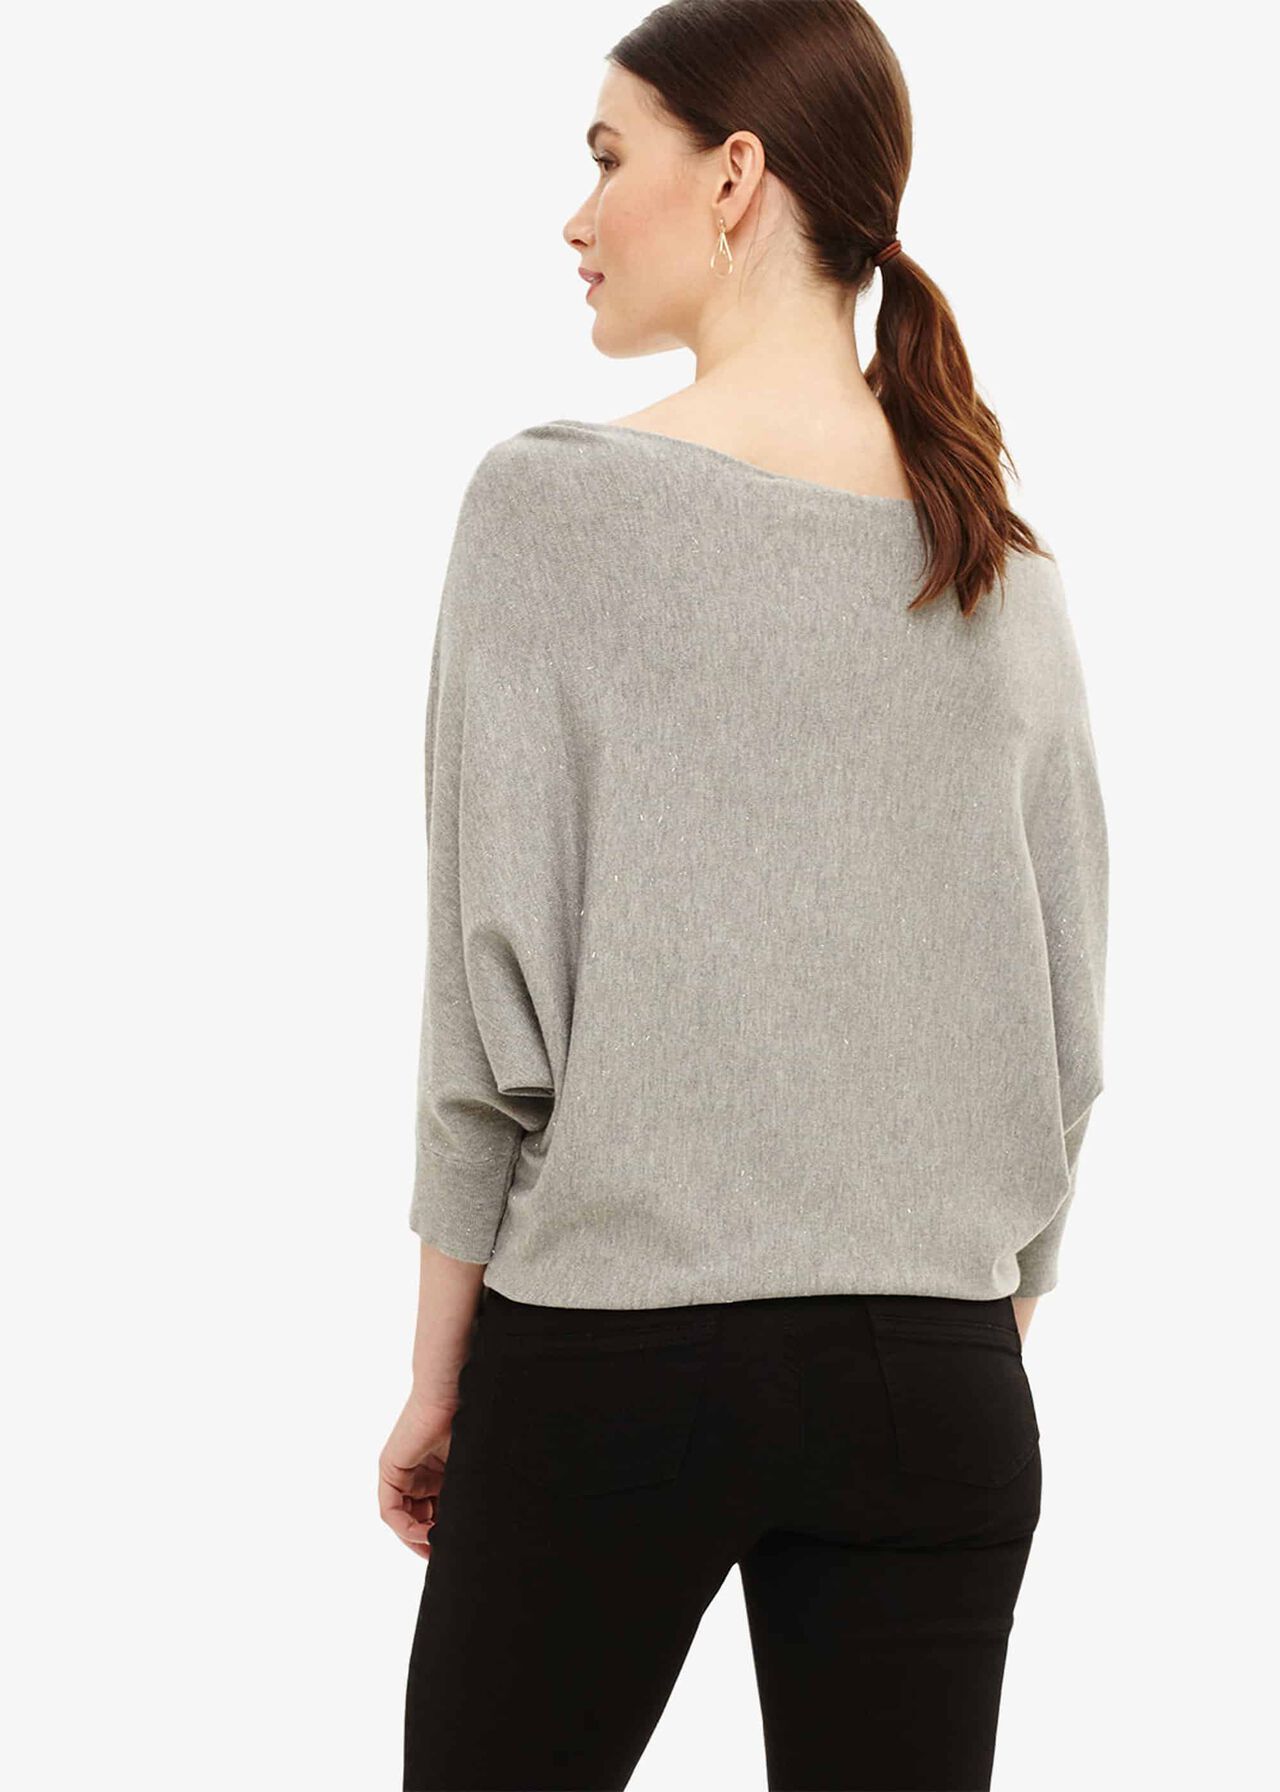 Becca Sparkle Batwing Knit Top